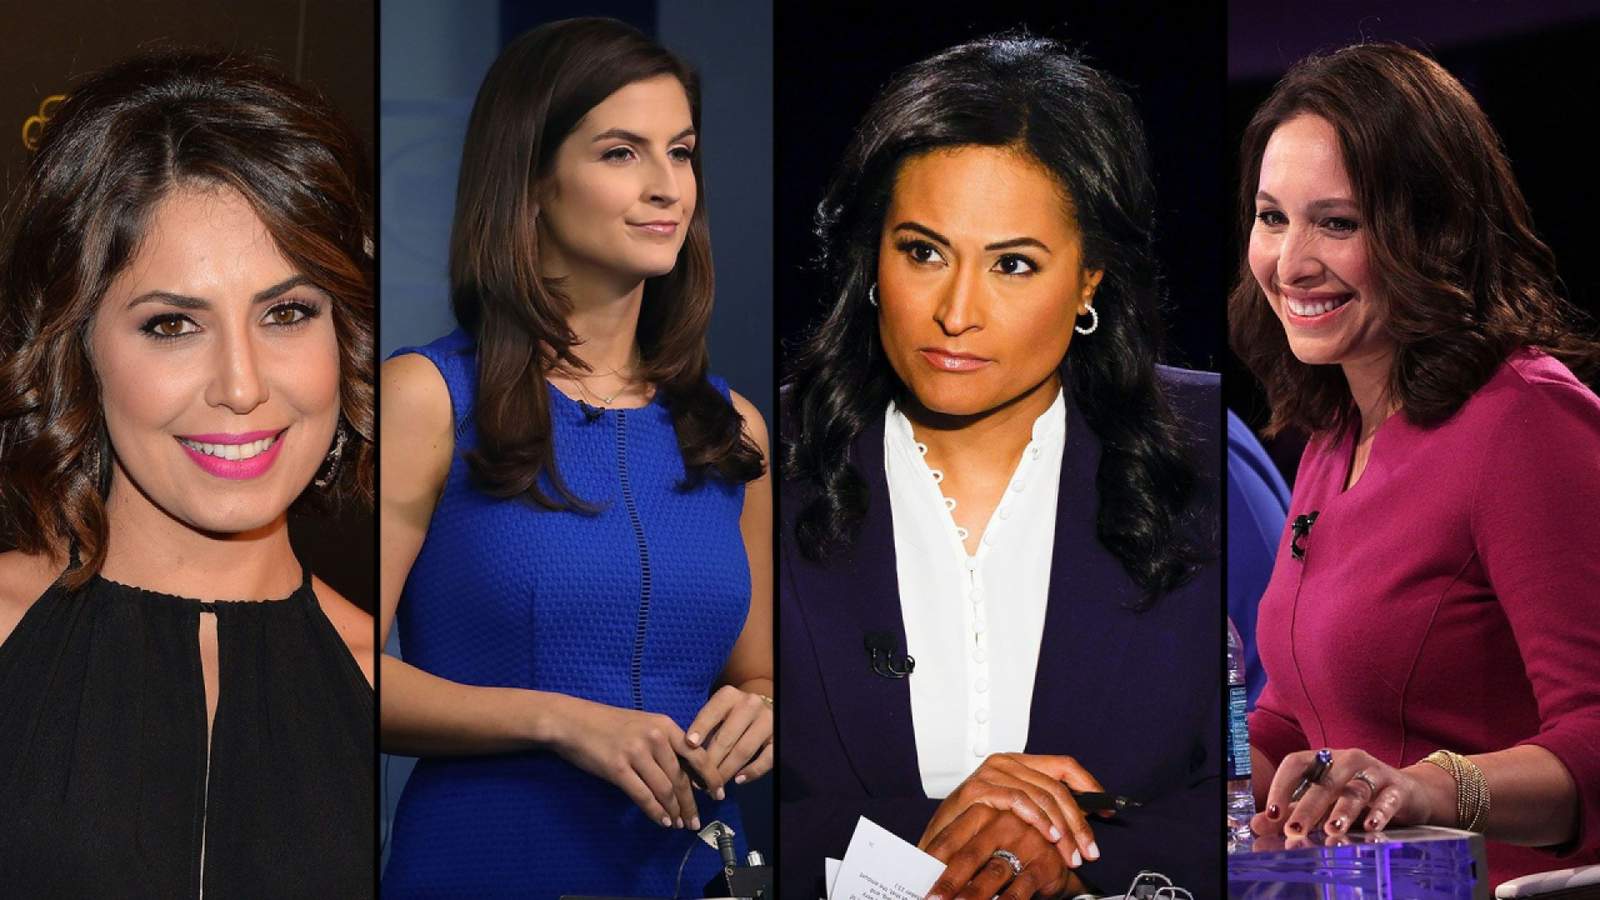 ‘It’s about time’: Women to lead White House coverage for four major news networks